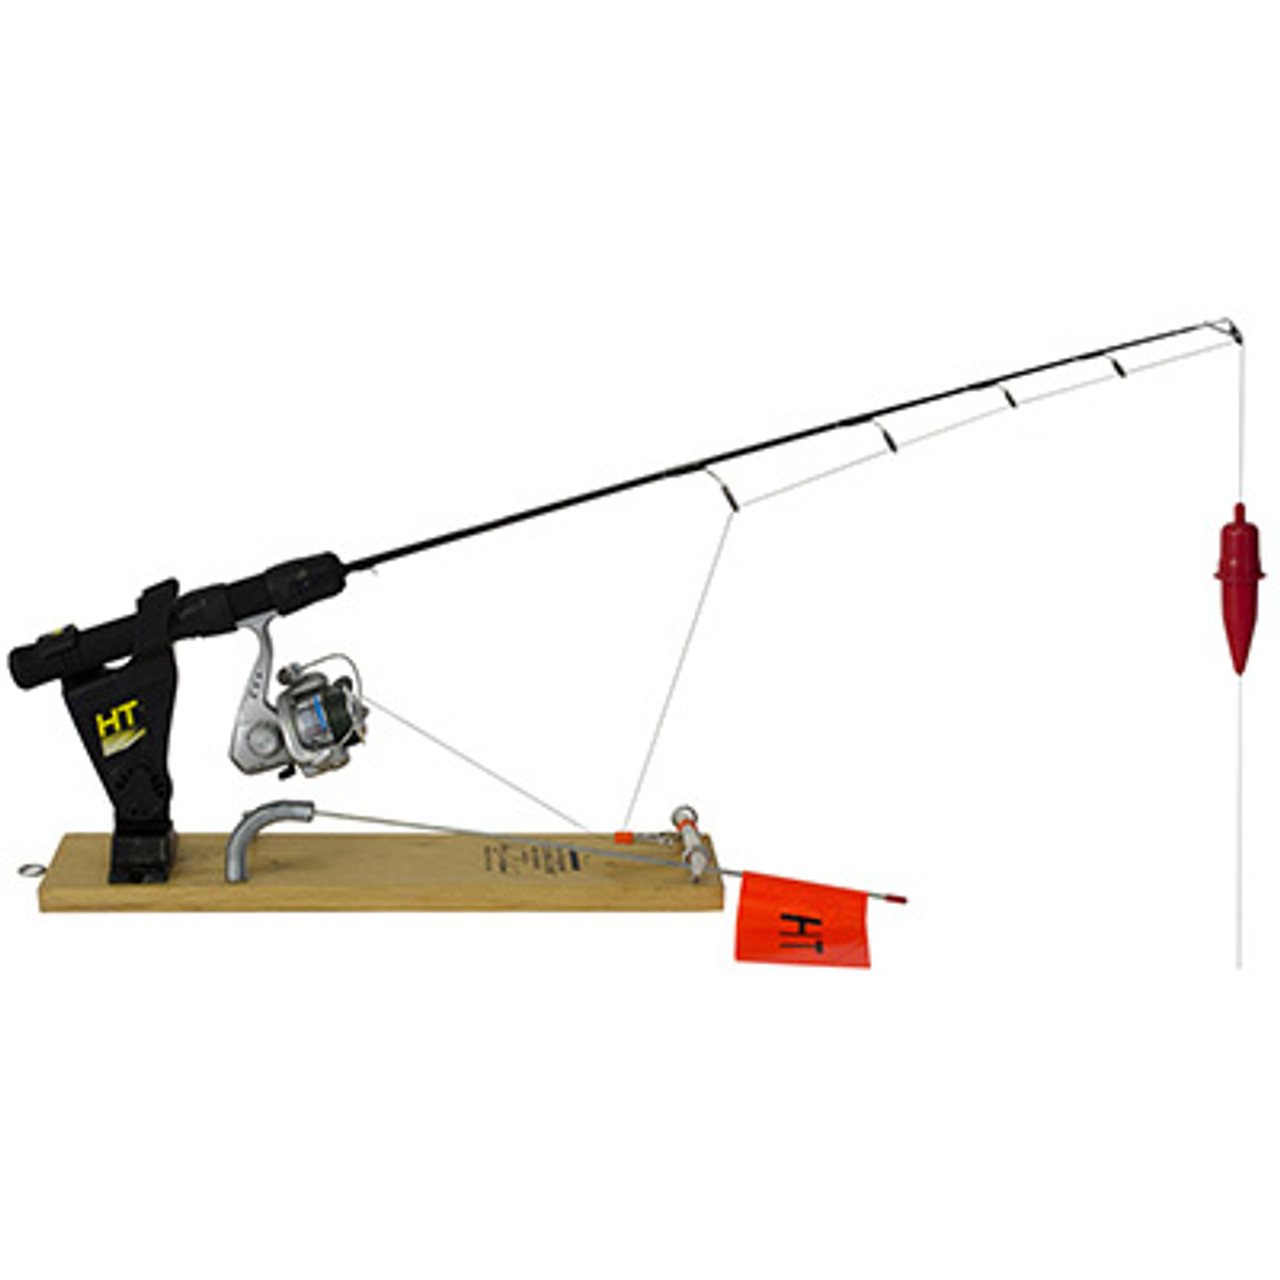 Ice Rigger Rod Holder with Flag Bite Signal by Hi-Tech Fishing